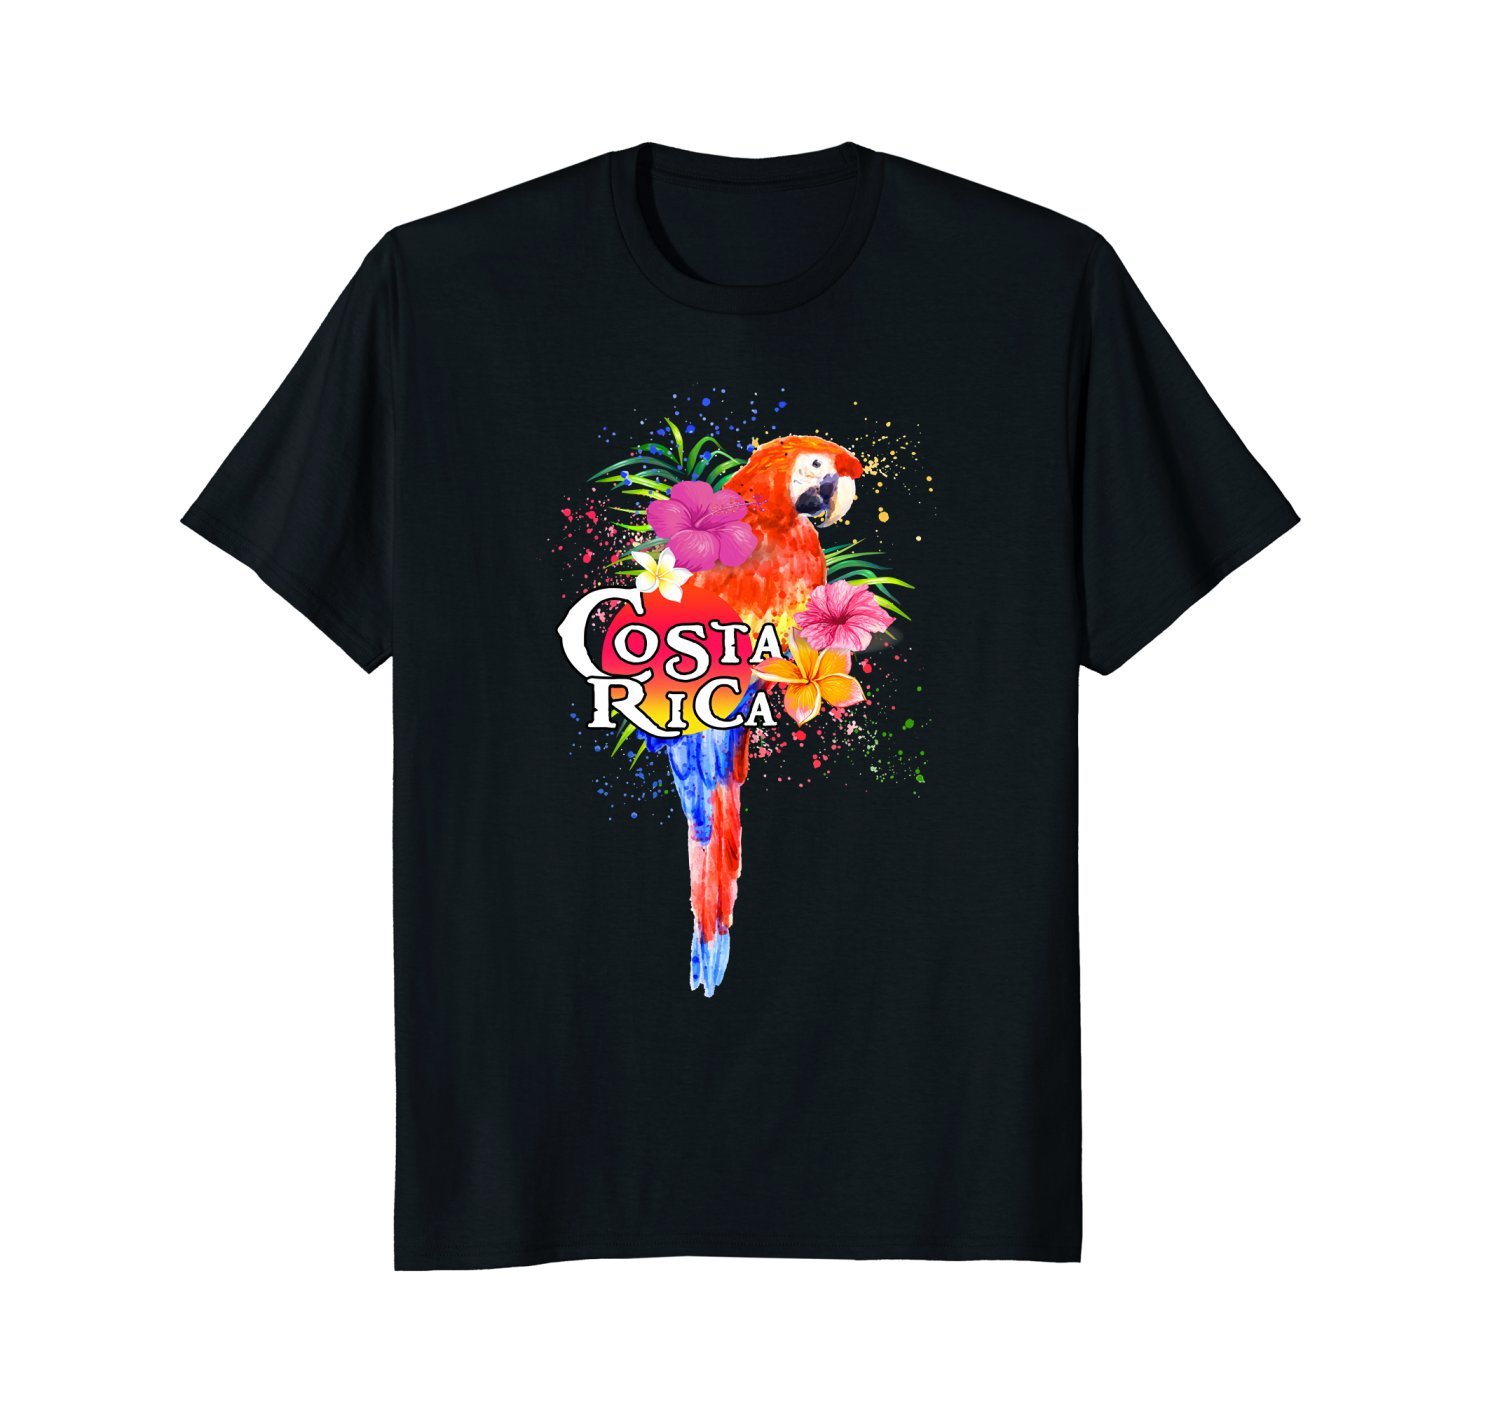 Costa Rica T-Shirt Tropical Parrot Colorful